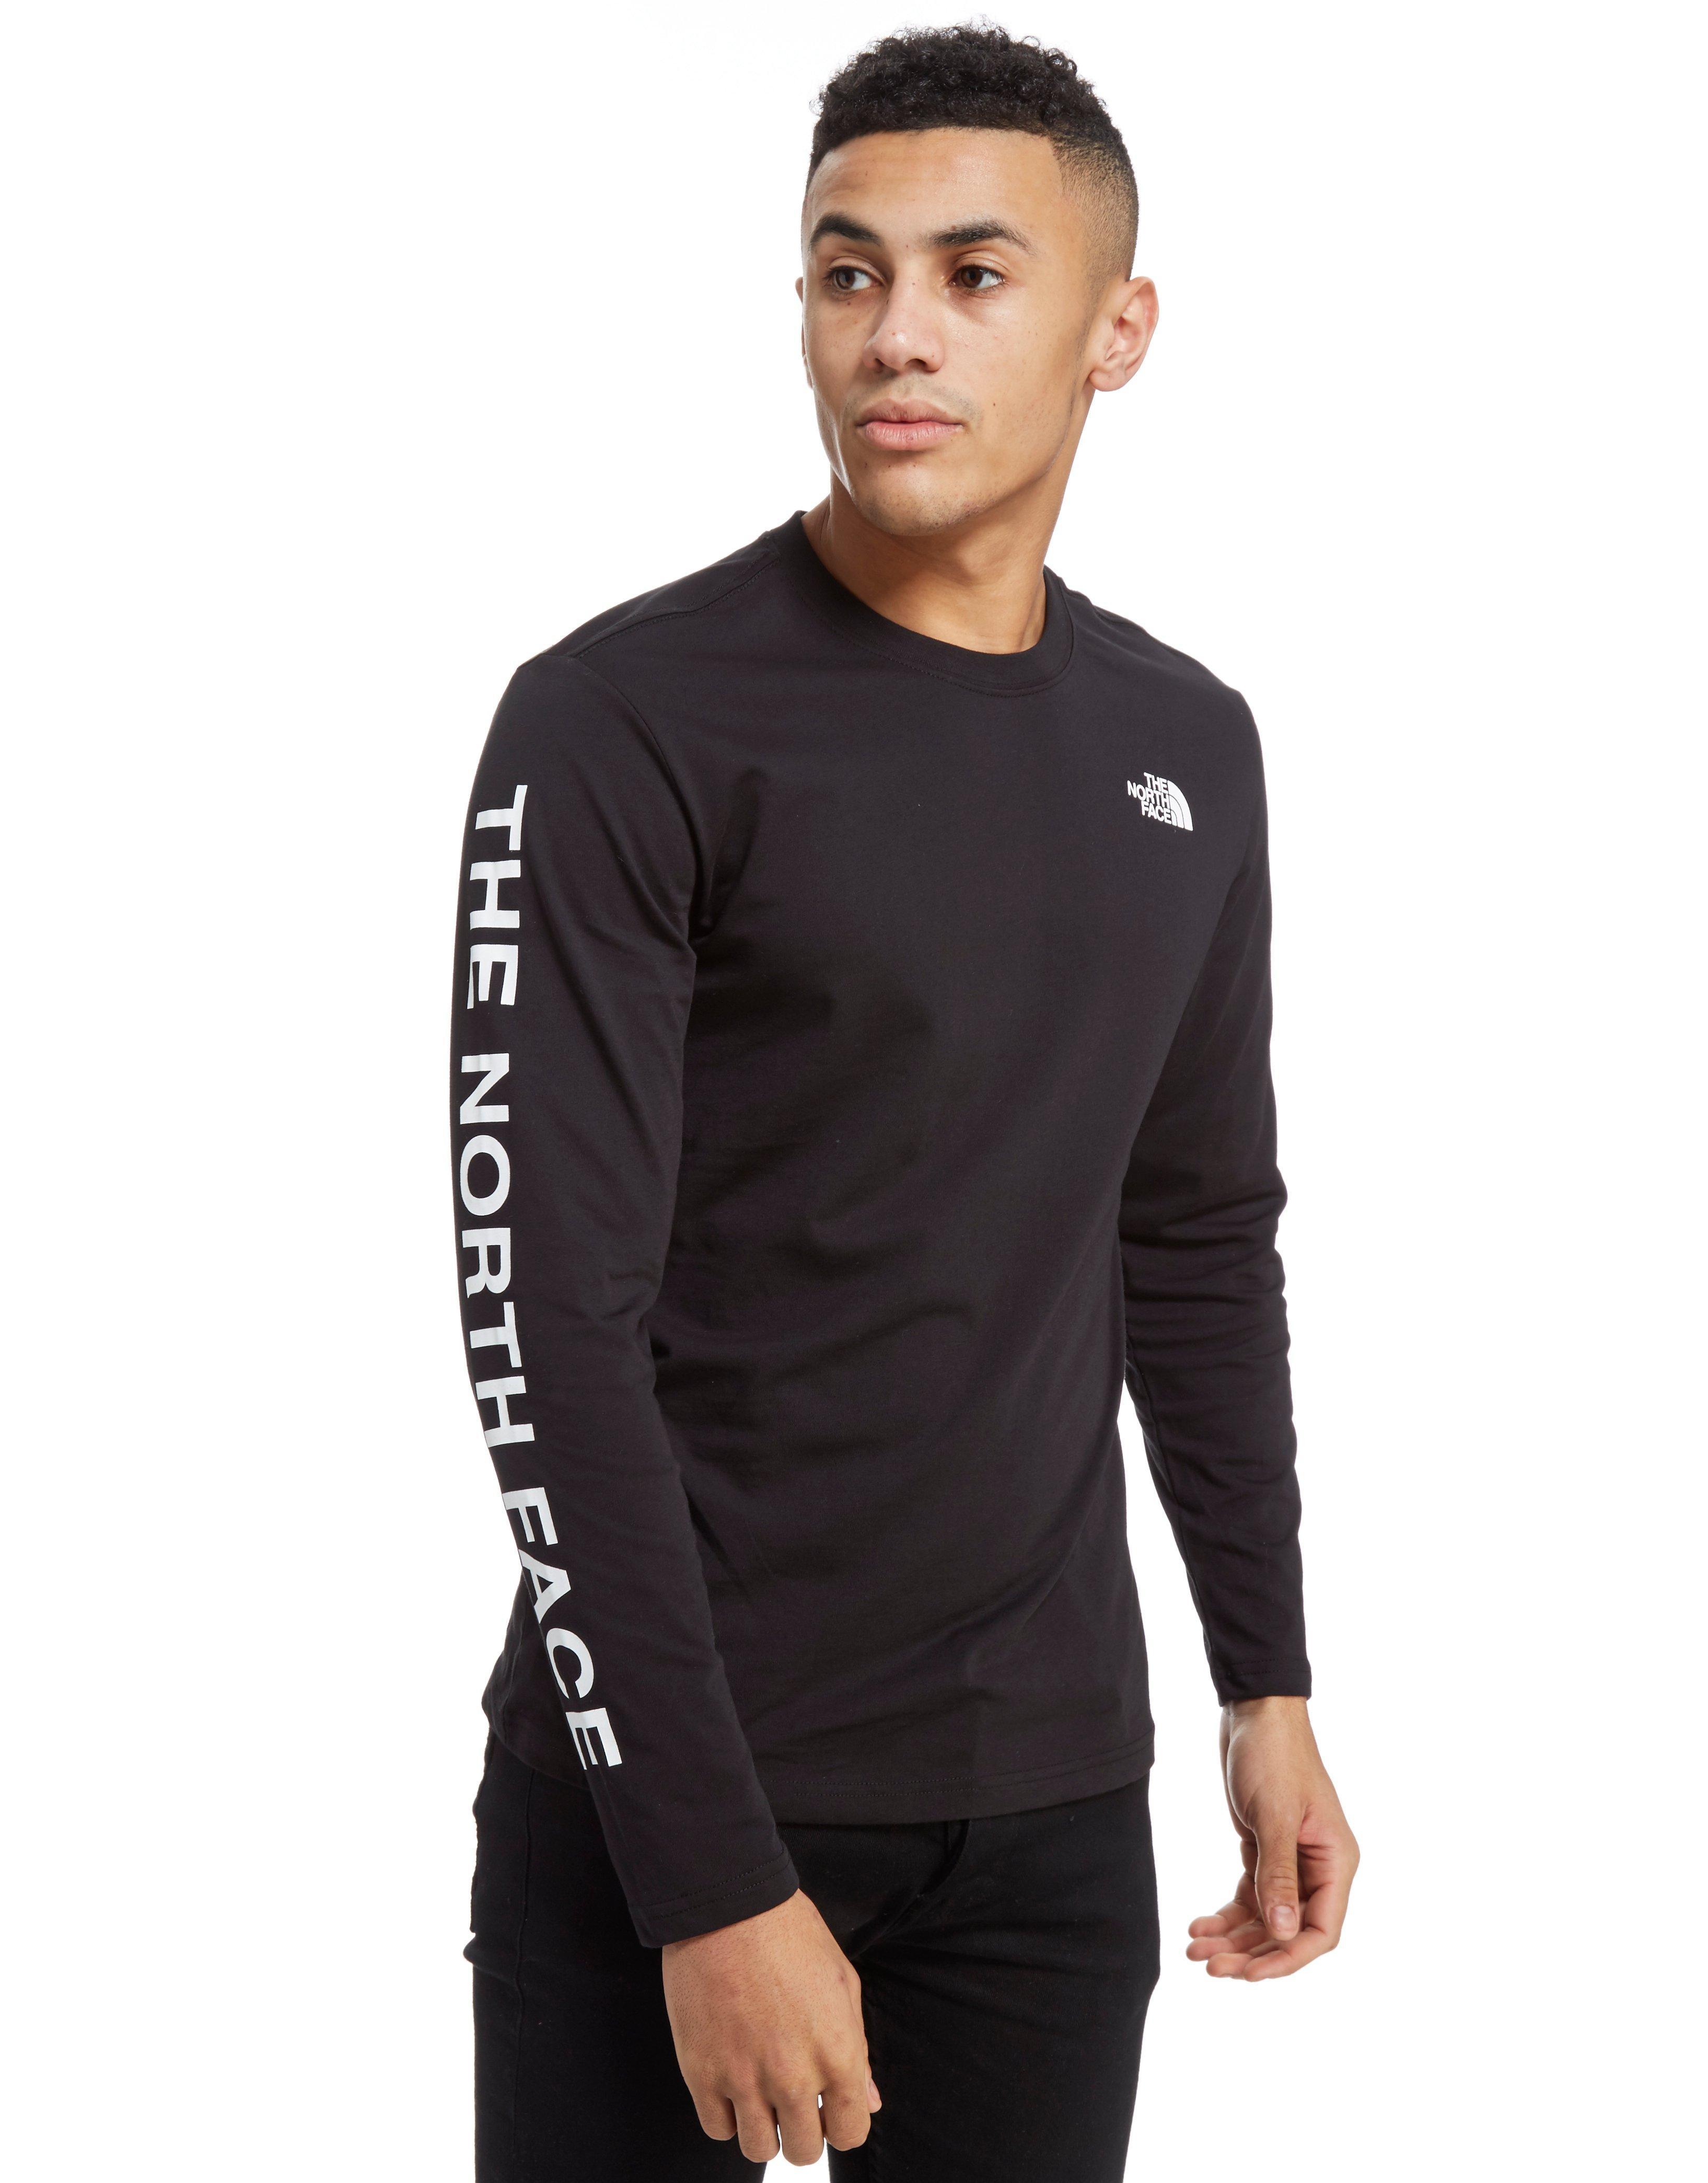 black north face long sleeve top